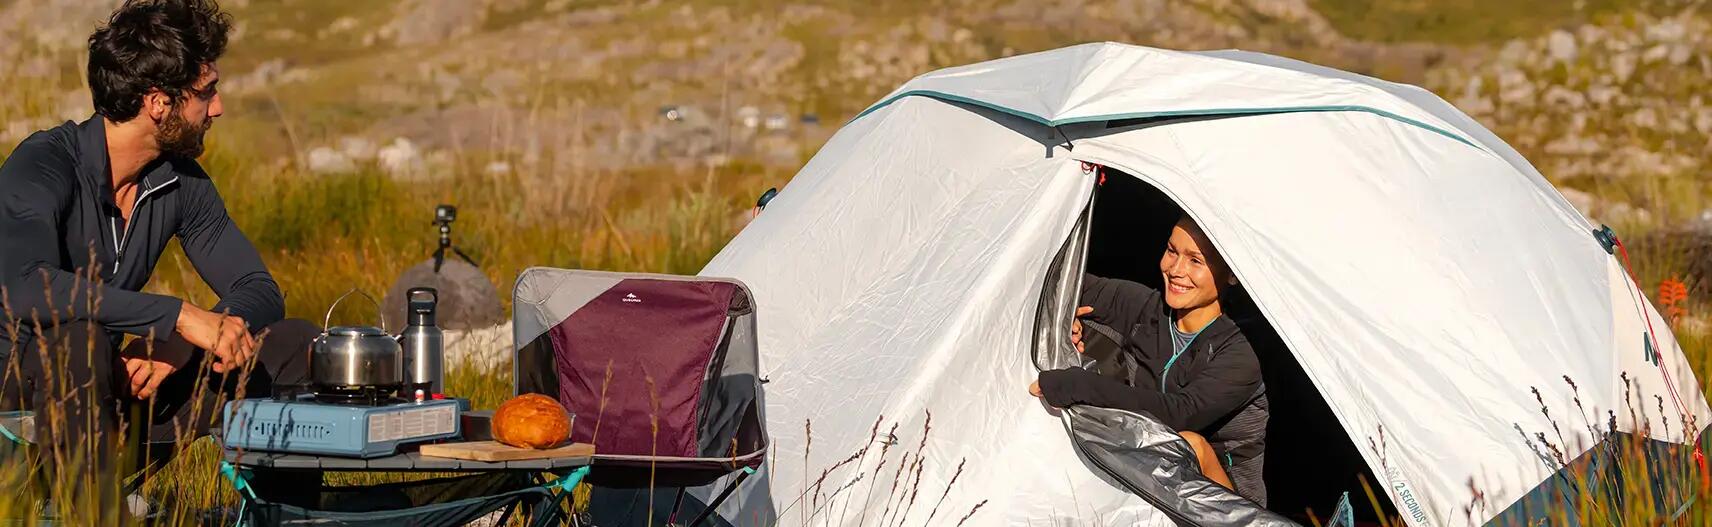 How to Keep Your Tent in Good Condition